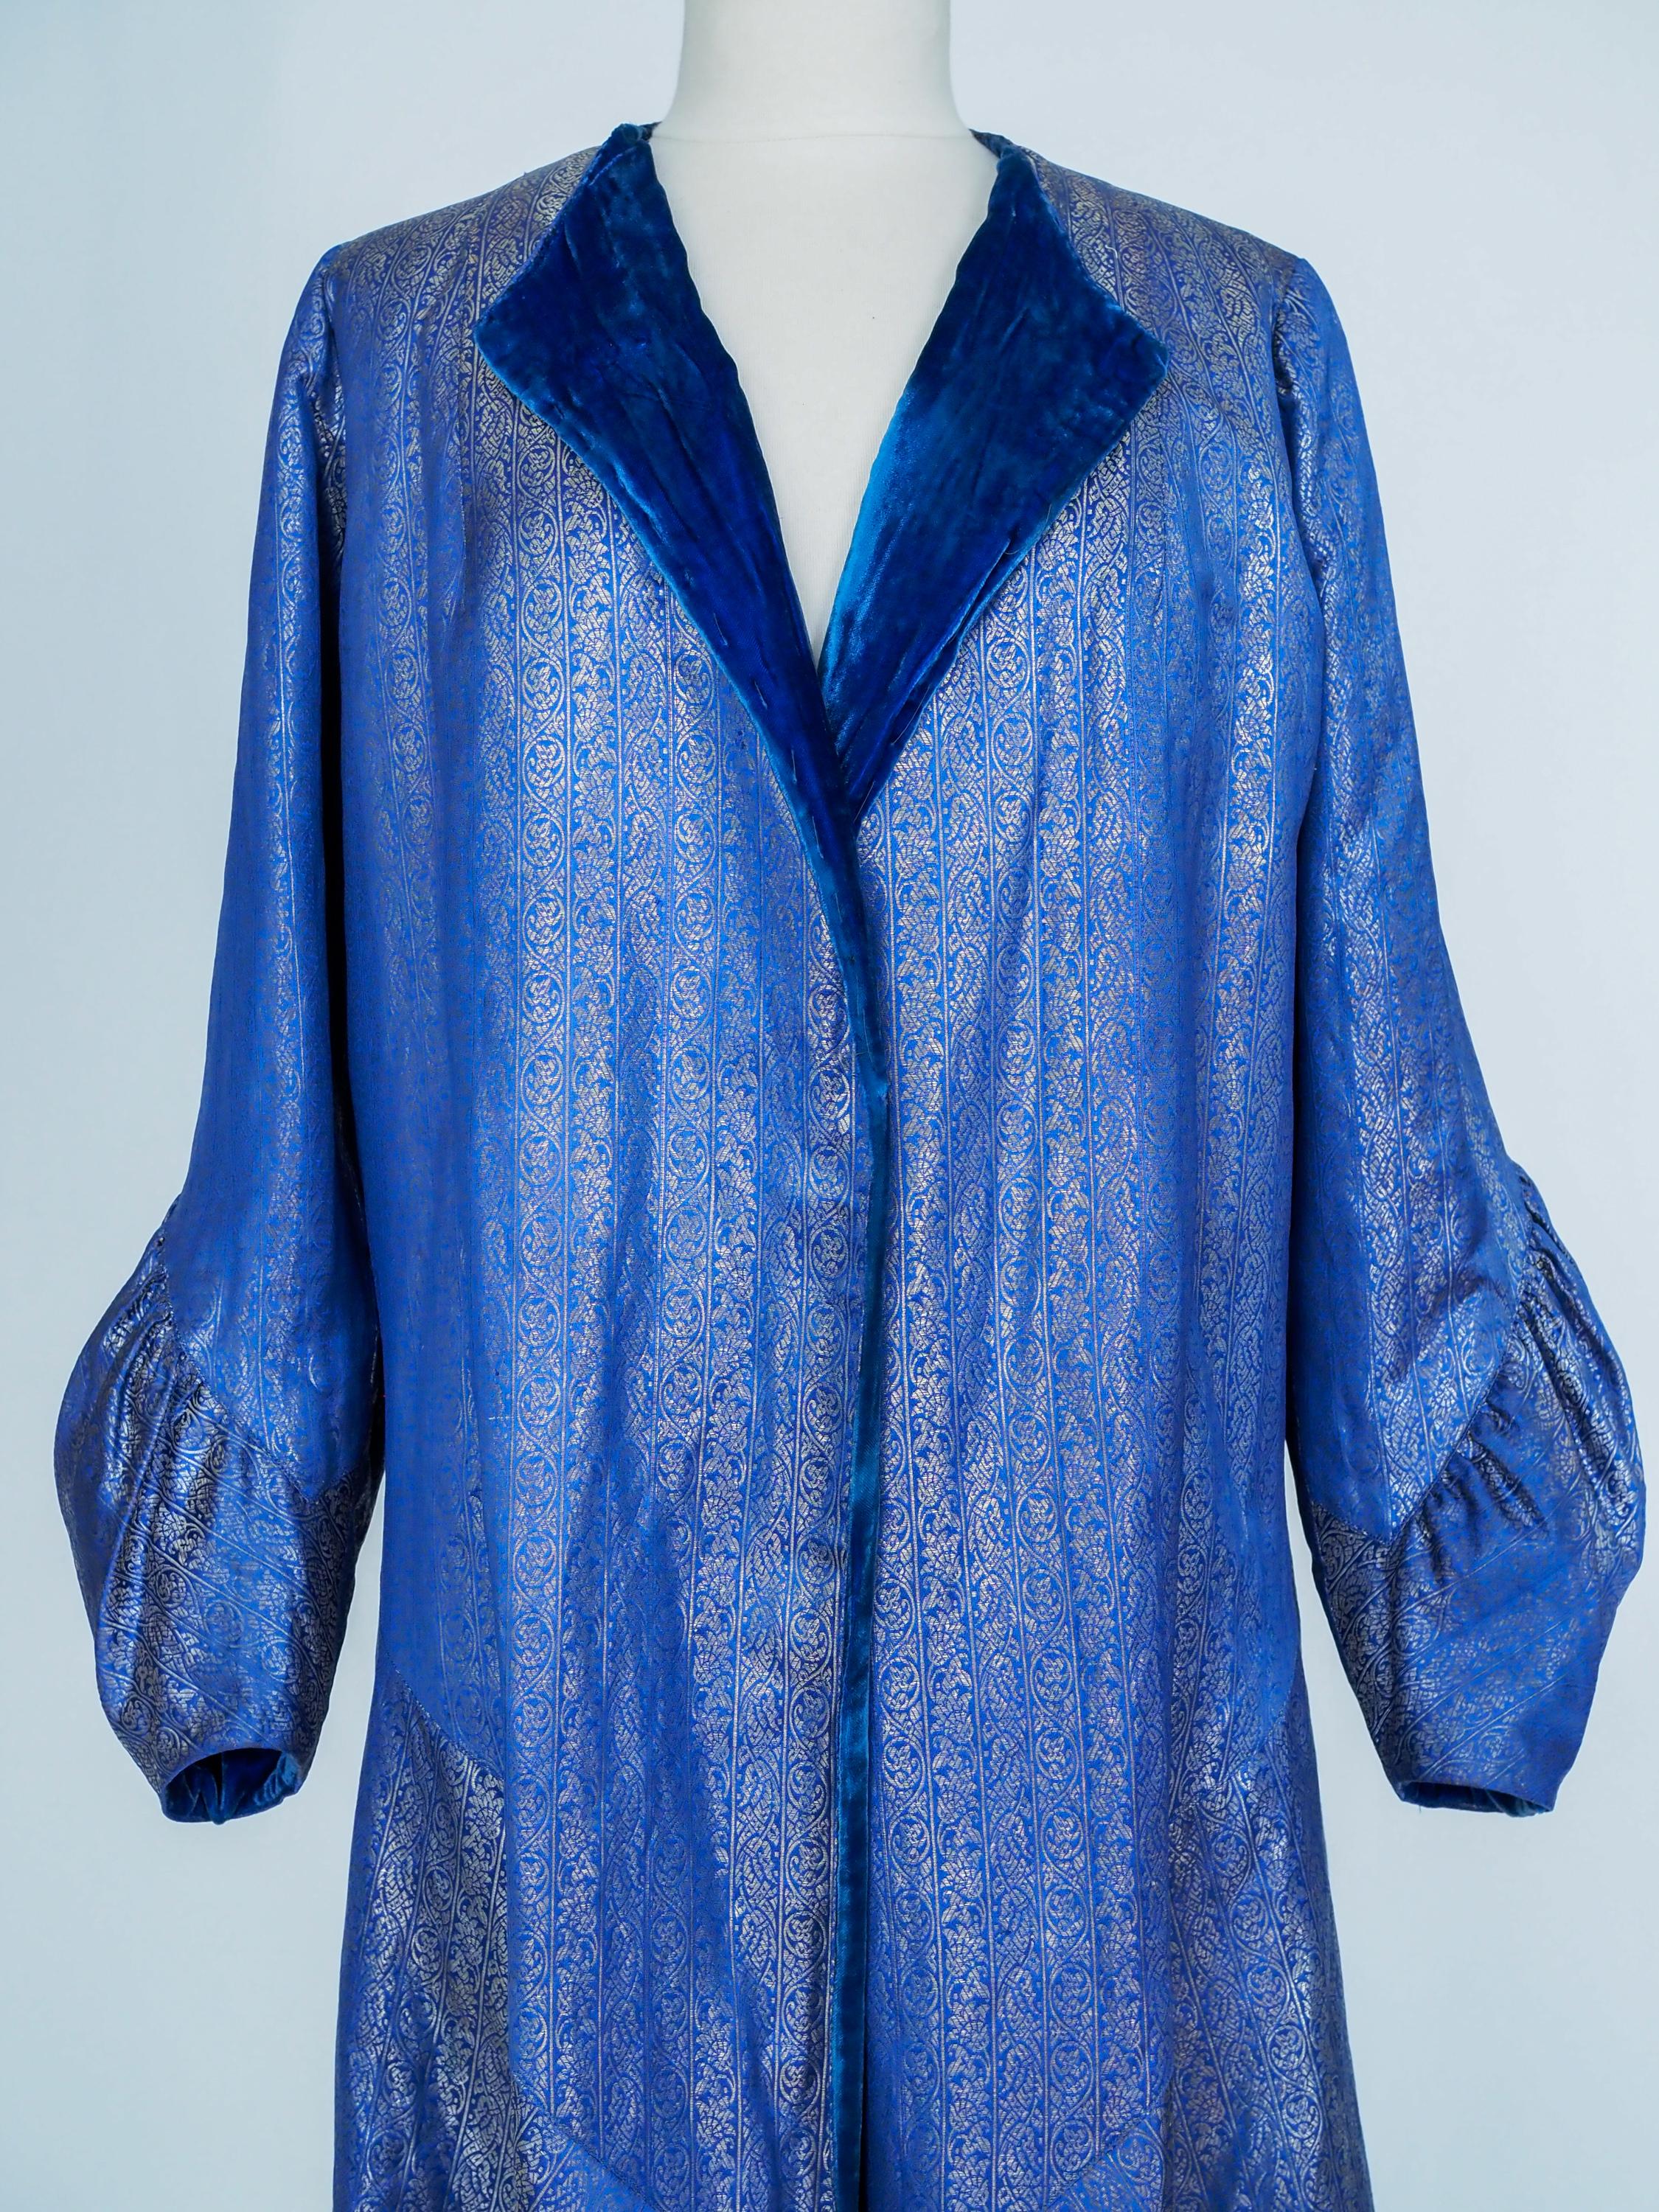 Evening Couture coat in silver lamé by Germaine Lecomte N°03871 Paris Circa 1930 For Sale 10